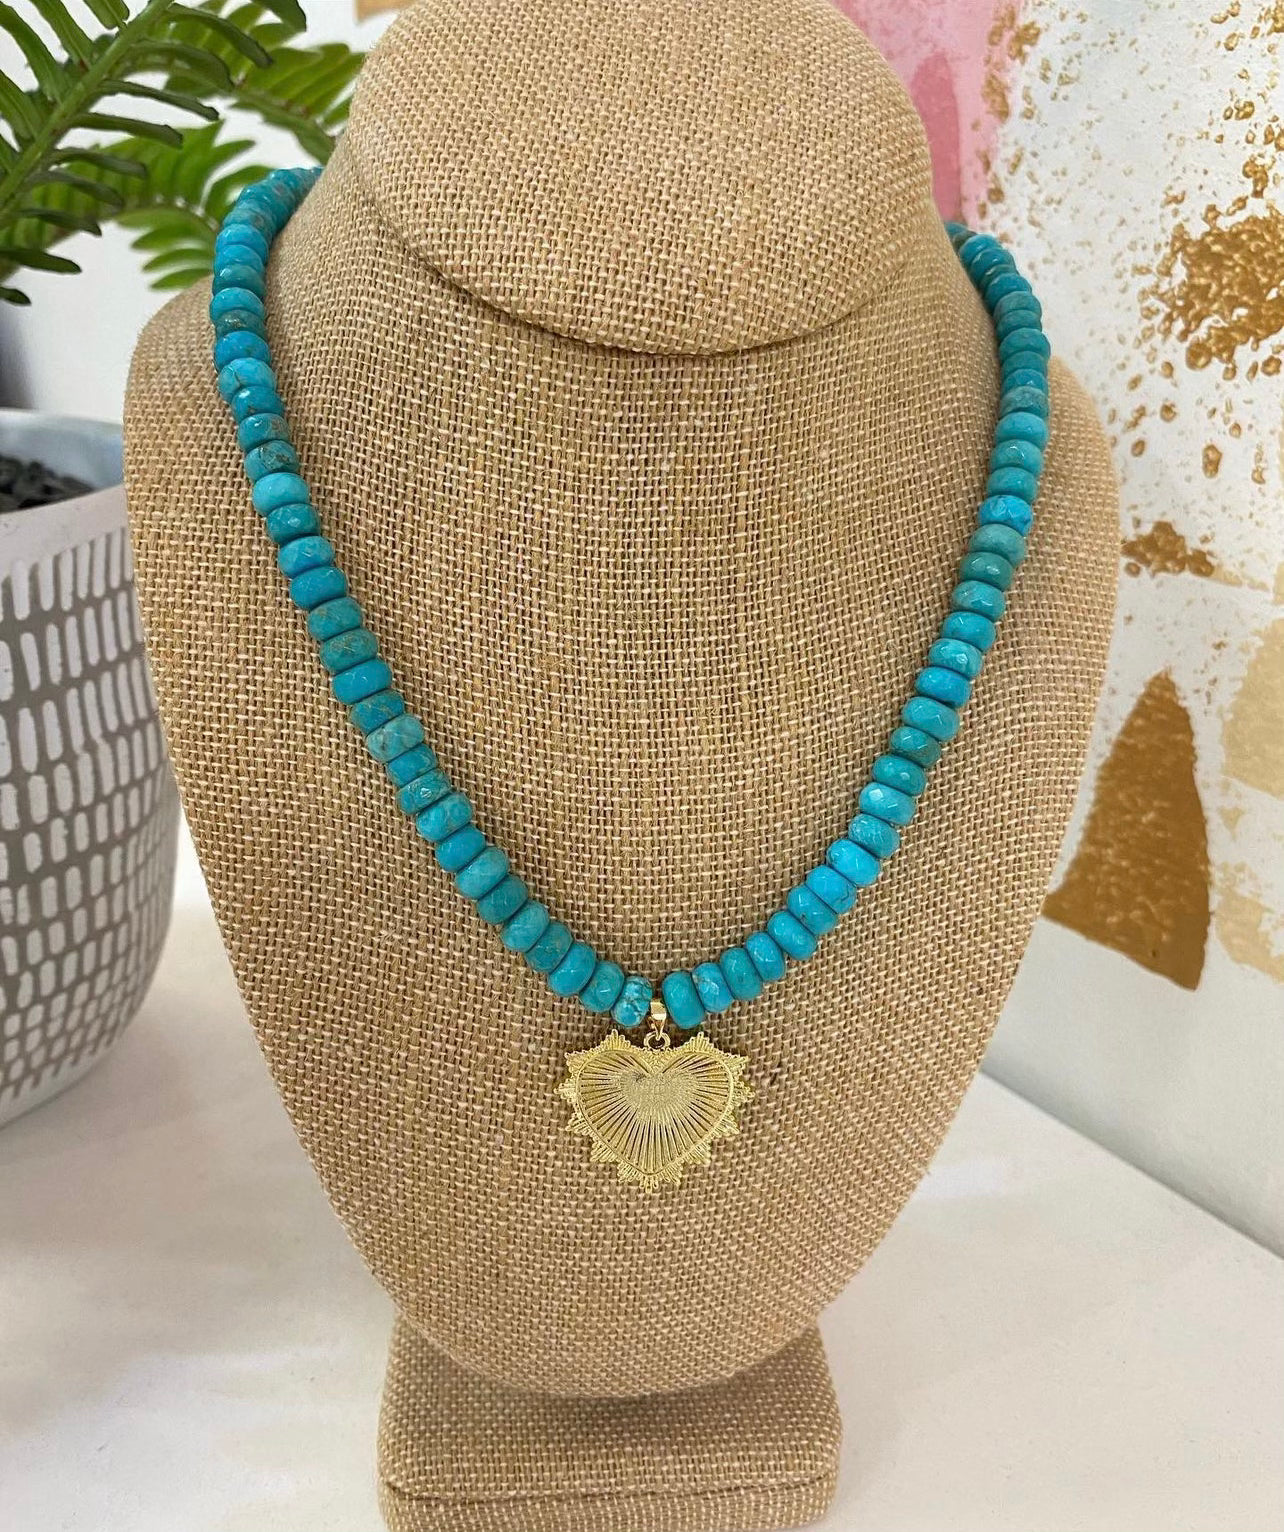 Mac & Malley Heart Collection Necklace - Turquoise